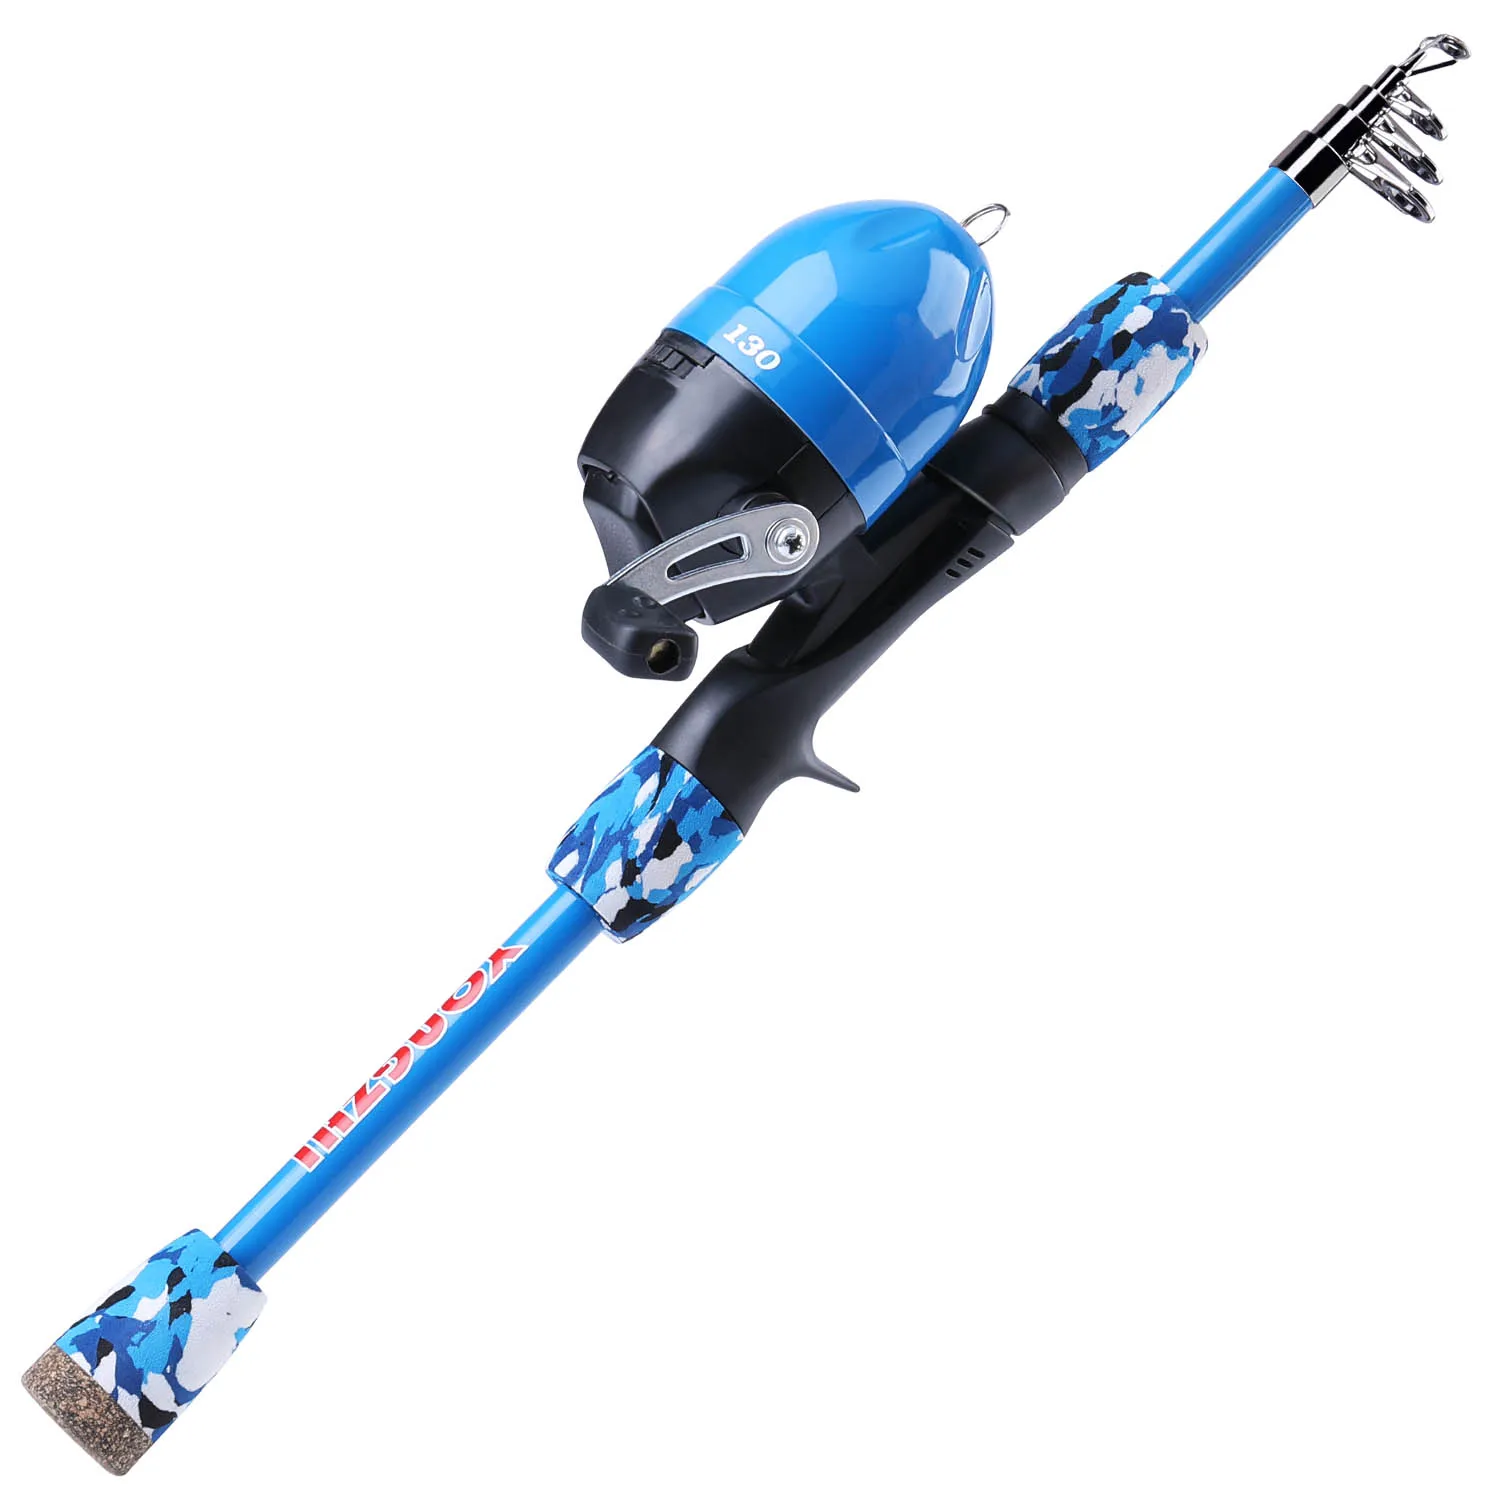 https://ae01.alicdn.com/kf/H295afb8aa1d9458887b75d23c2535b7fB/Sougayilang-1-5m-Kids-Fishing-Rod-Reel-Combos-Telescopic-Portable-Spinning-Fishing-Pole-and-Reel-With.jpg